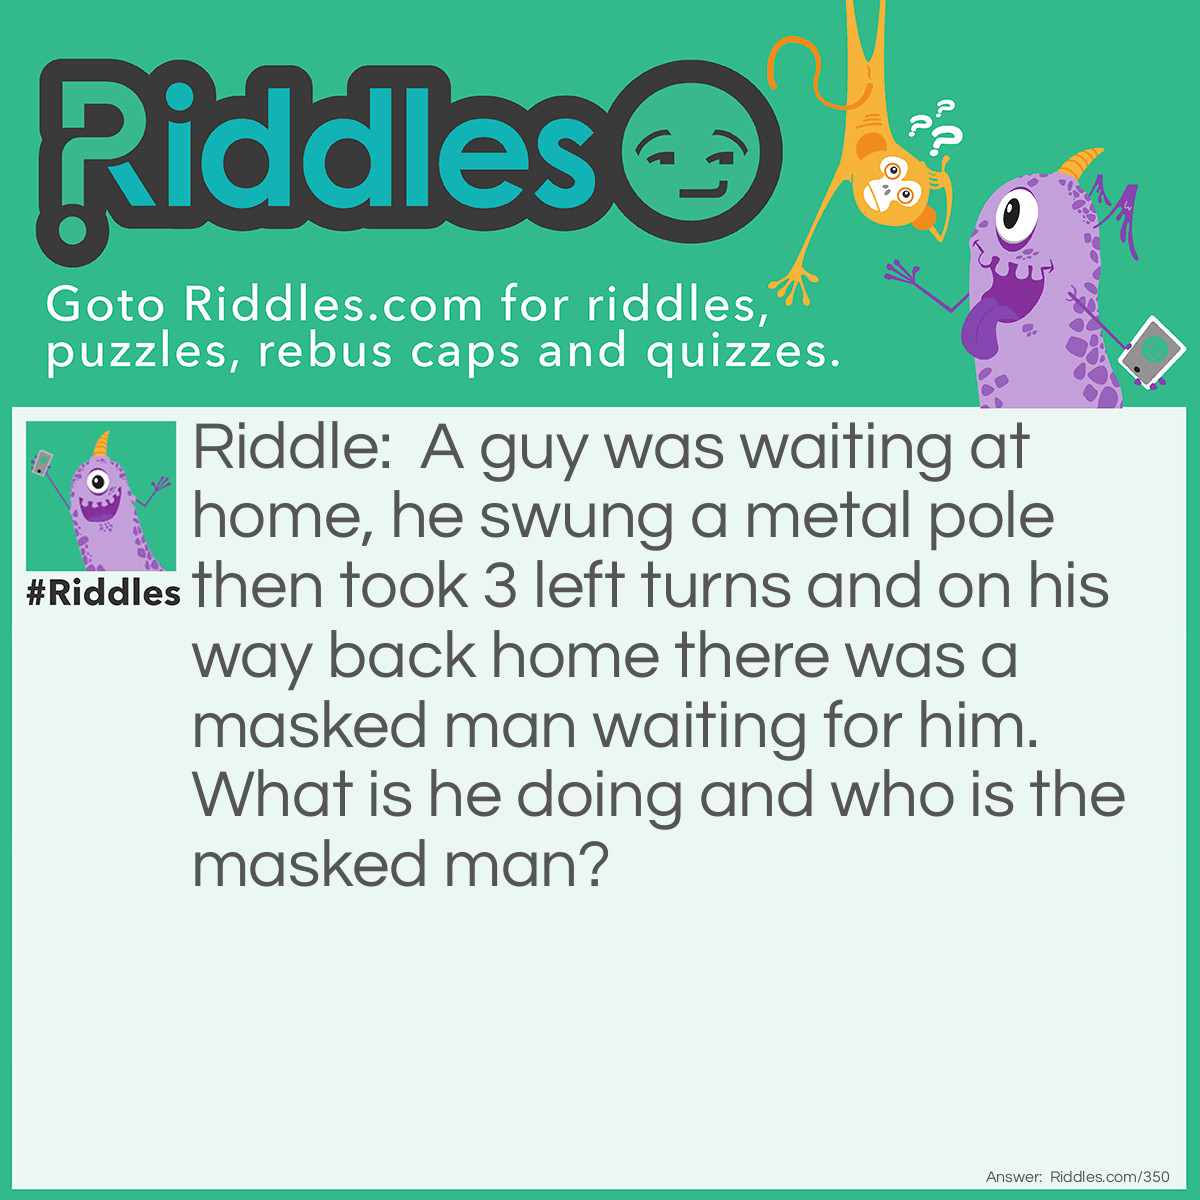 Riddle: A guy was waiting at home, he swung a metal pole then took 3 left turns and on his way back home there was a masked man waiting for him. What is he doing and who is the masked man? Answer: He is playing baseball and the masked man is the Catcher.